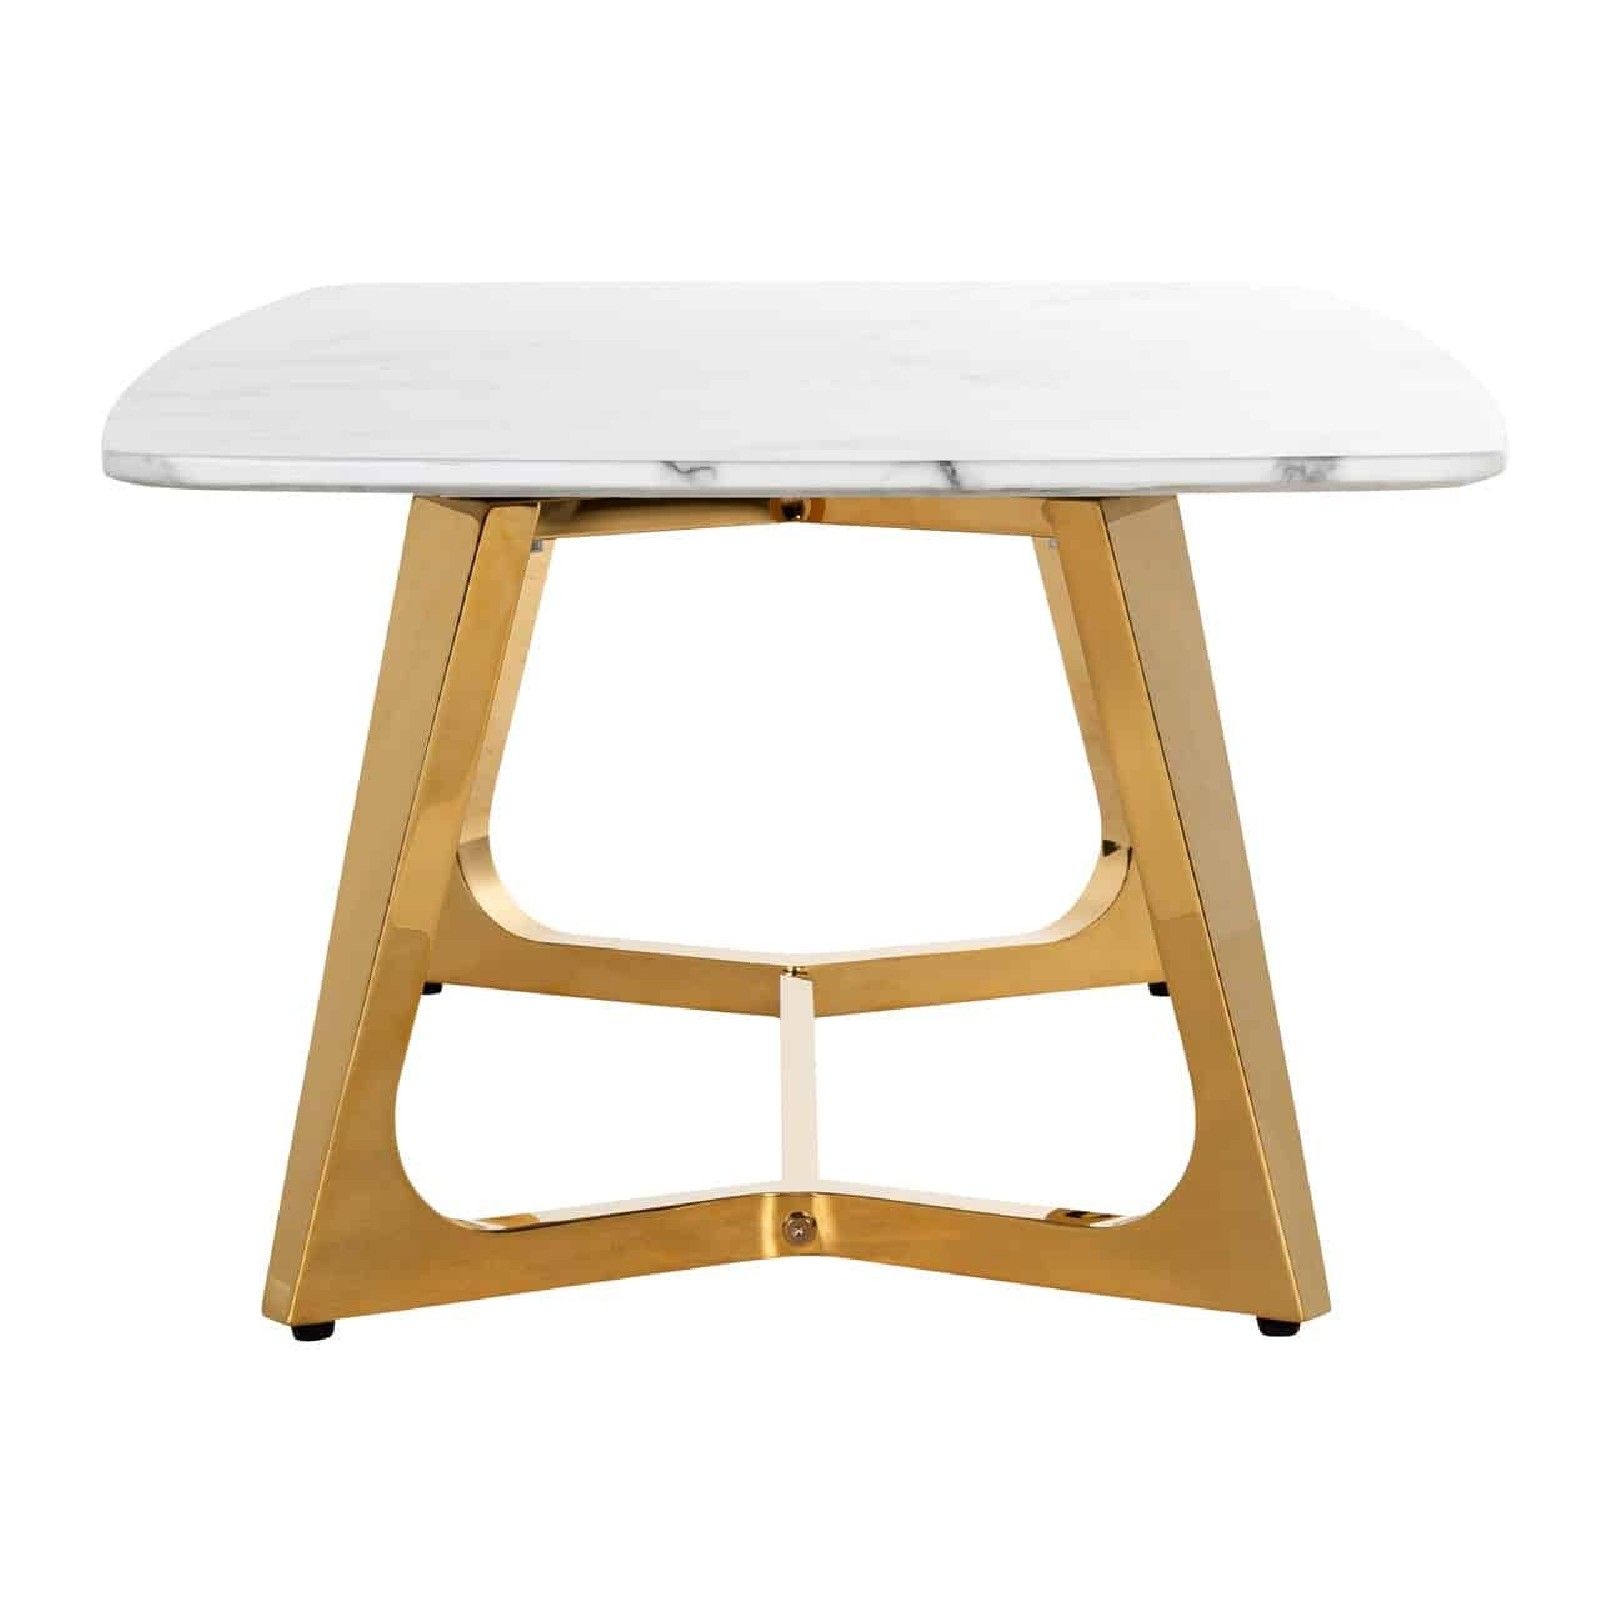 Table basse ovale - Or et marbre blanc 